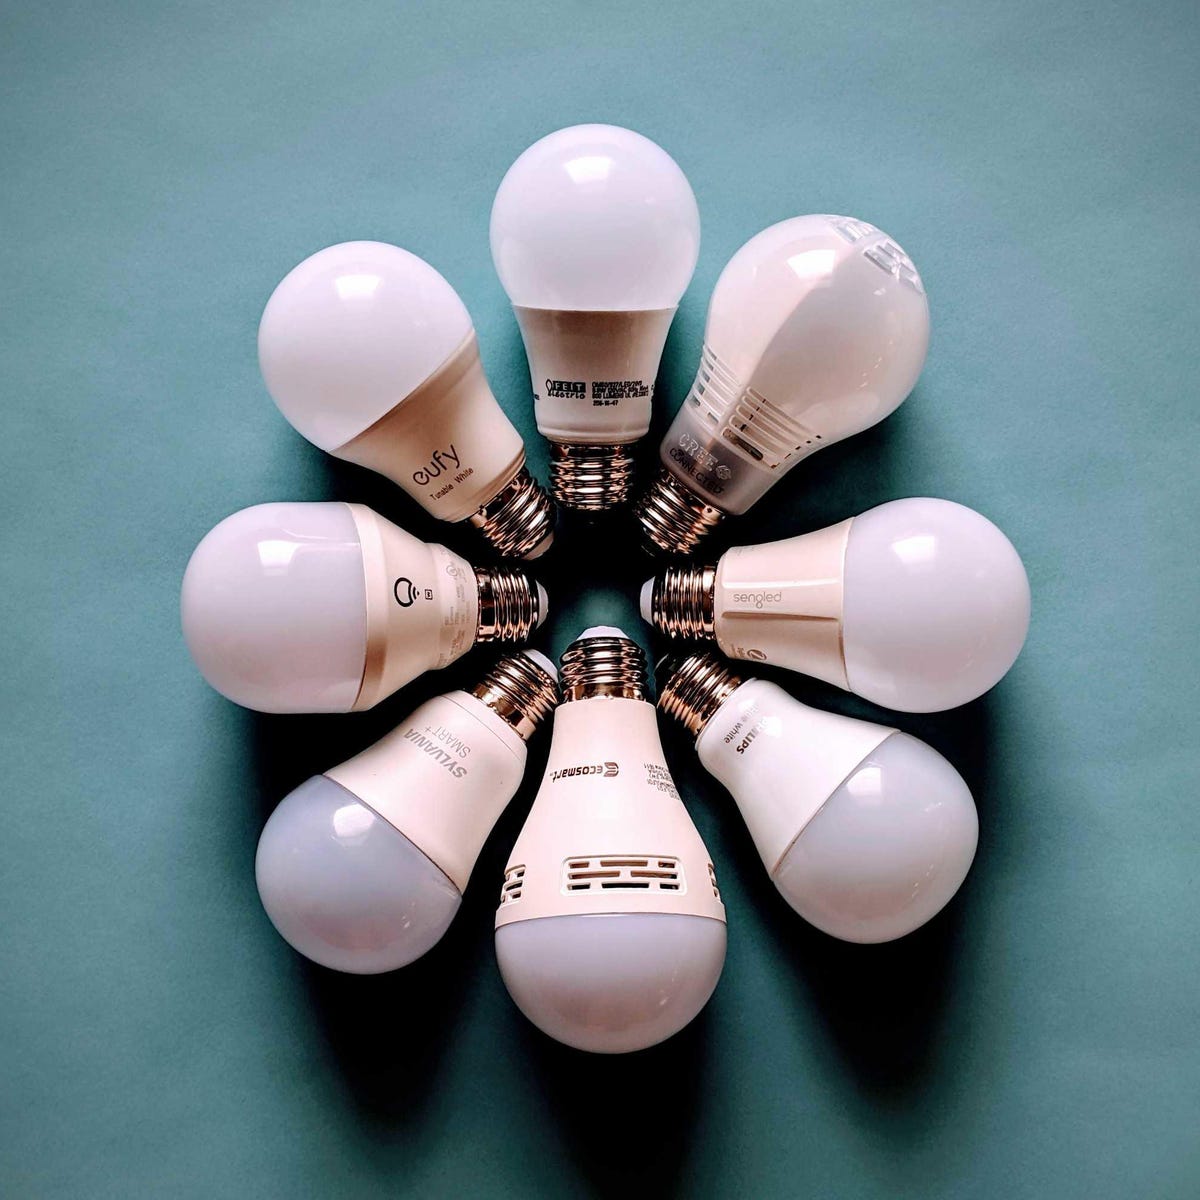 Switching to Only LED Bulbs? Good. But Here Are 5 Things to Think